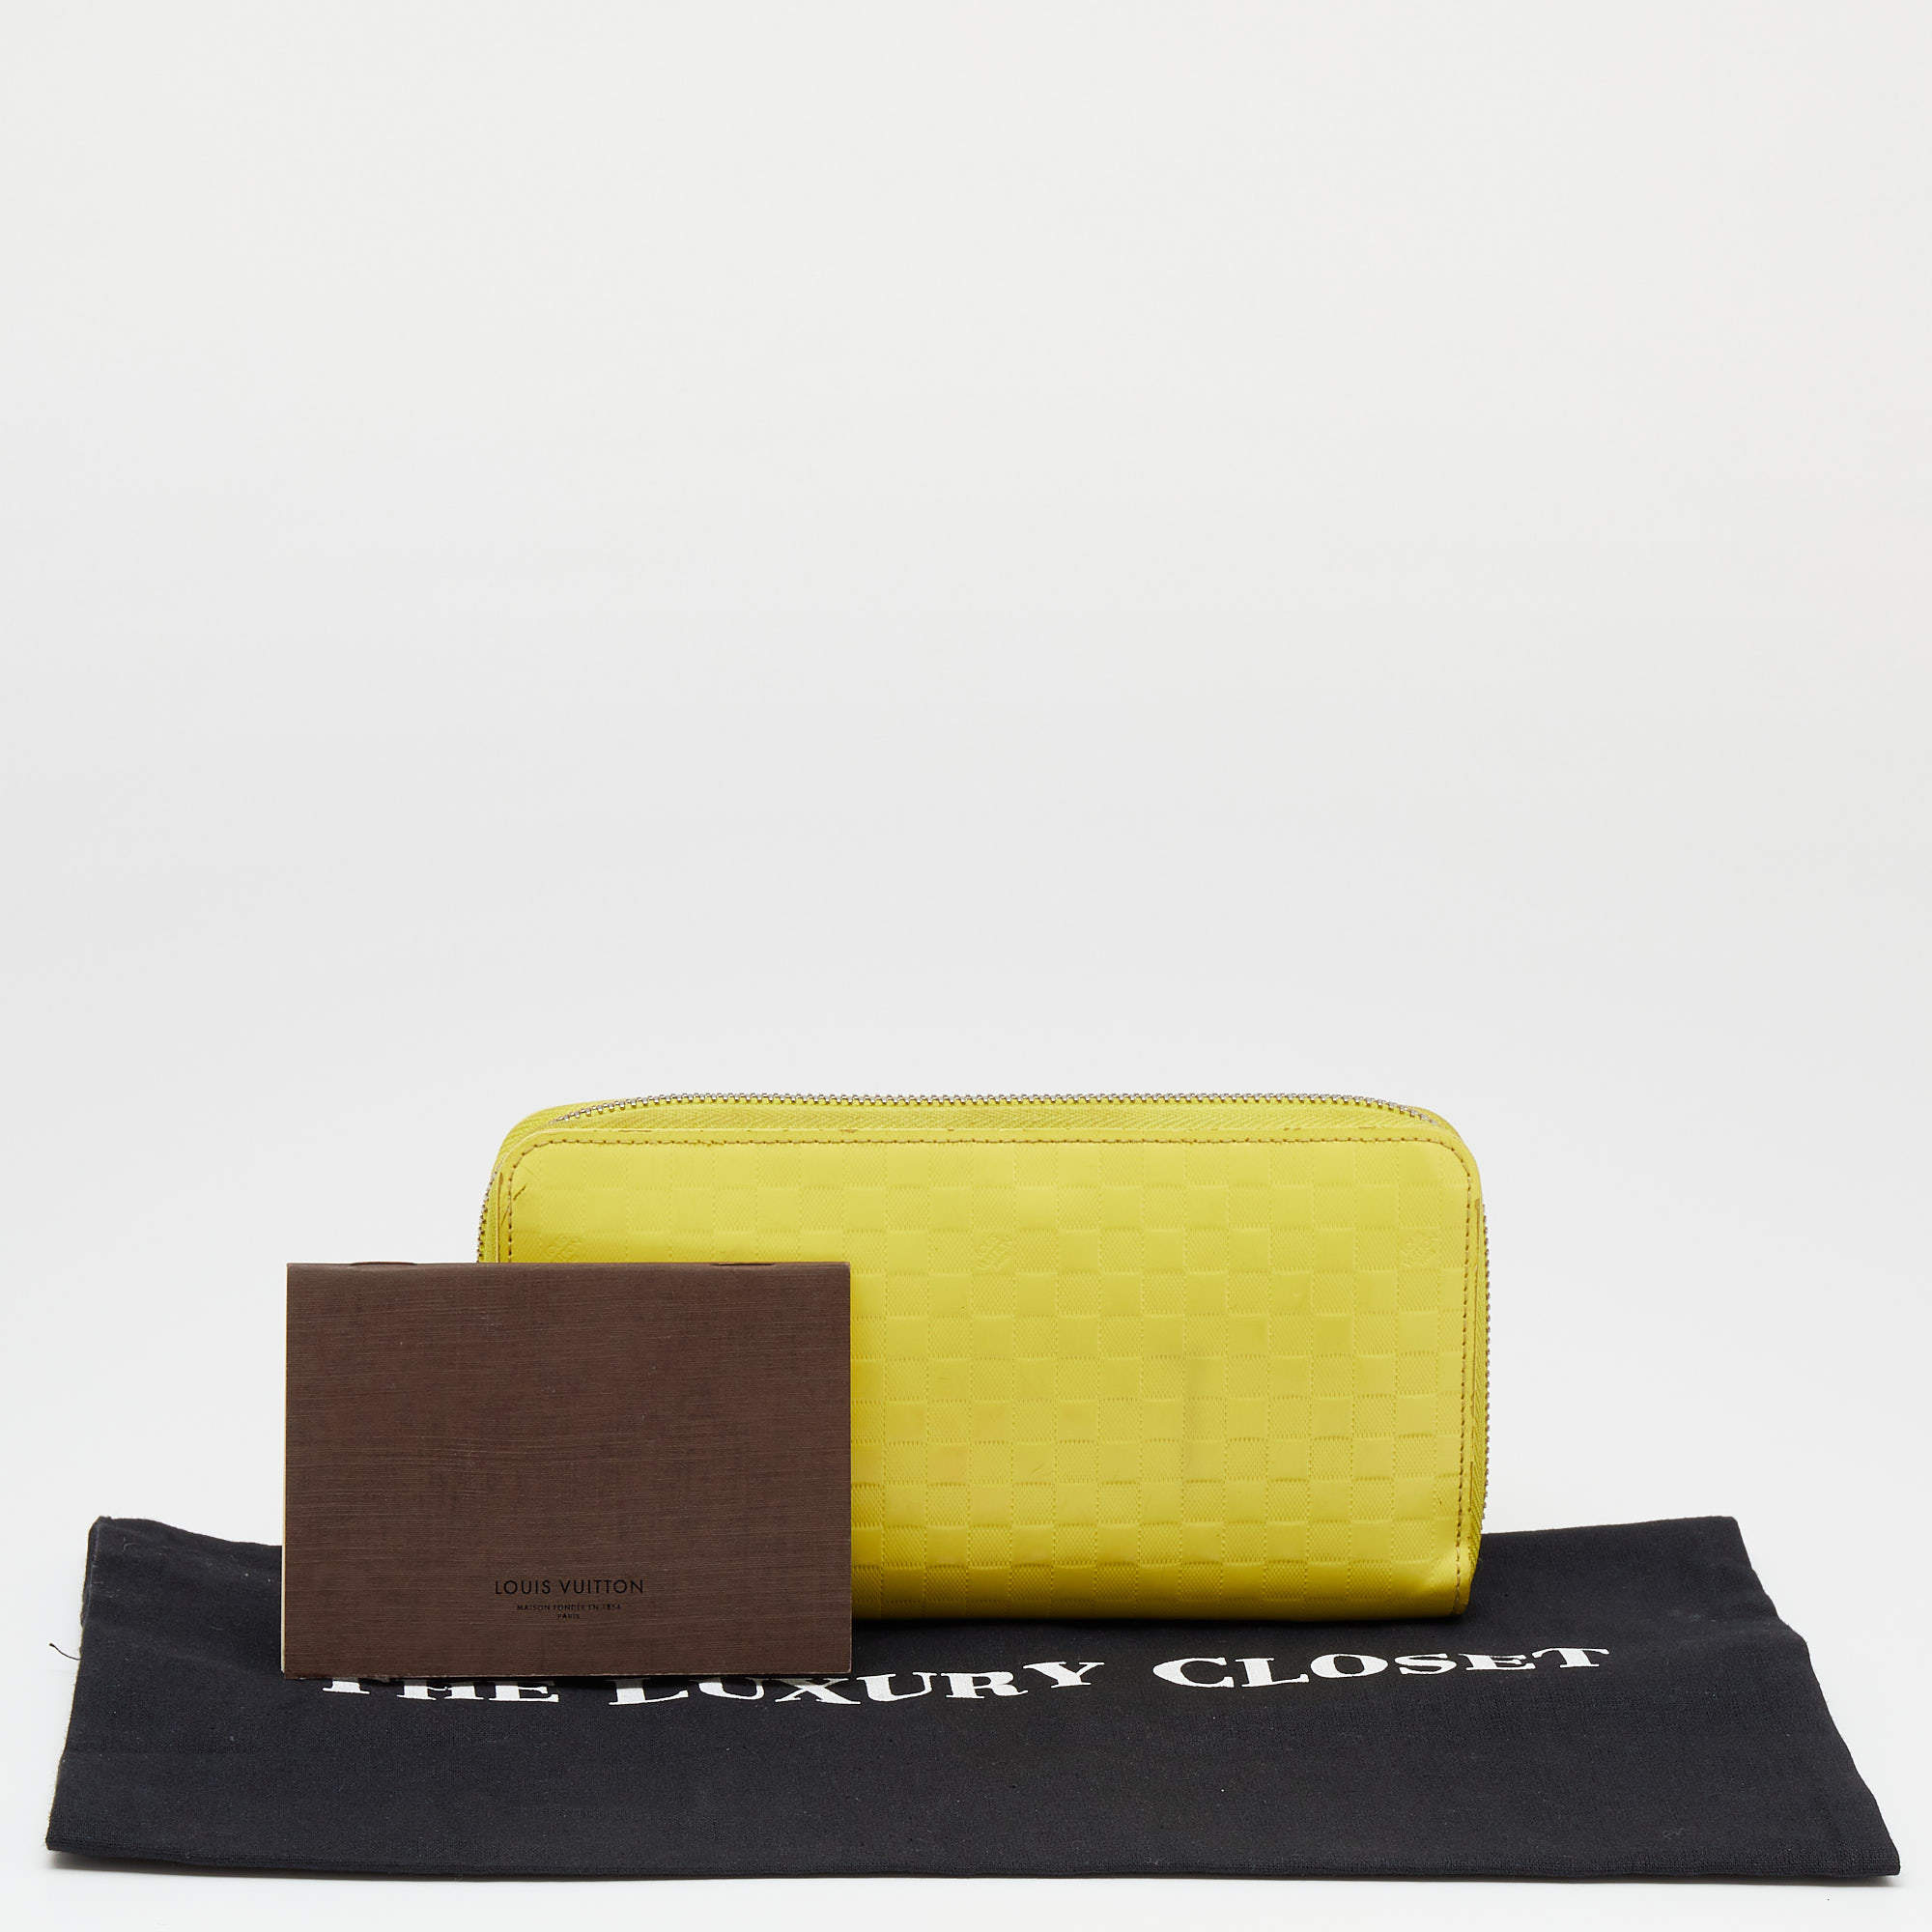 Louis Vuitton LV Wallet Yellow - $200 - From chic